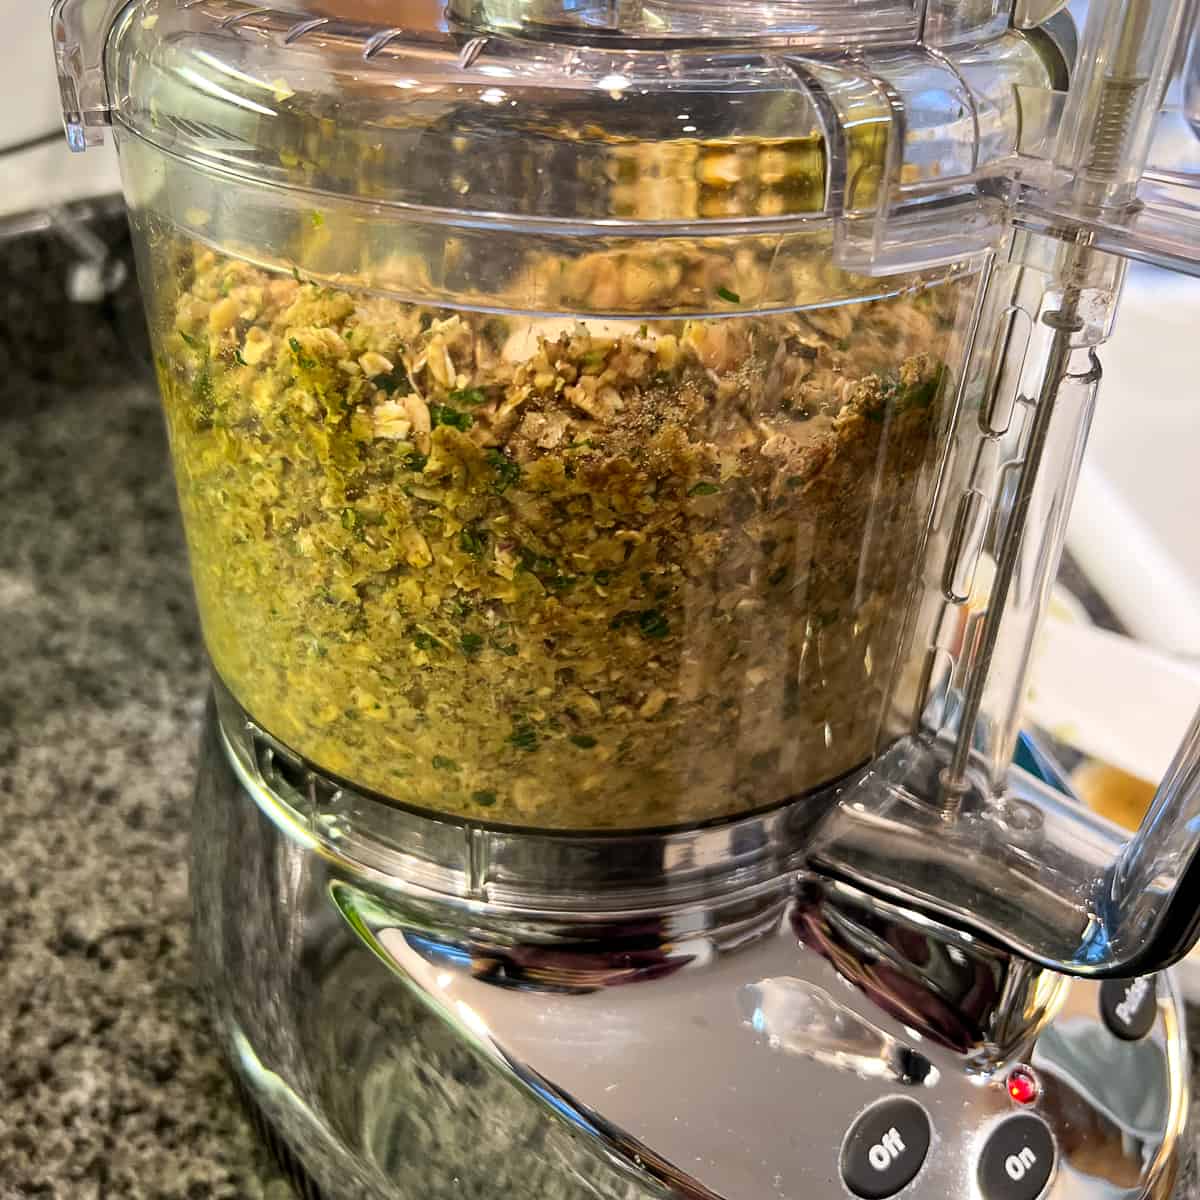 Chickpea burger patty mixture being processed in the food processor.